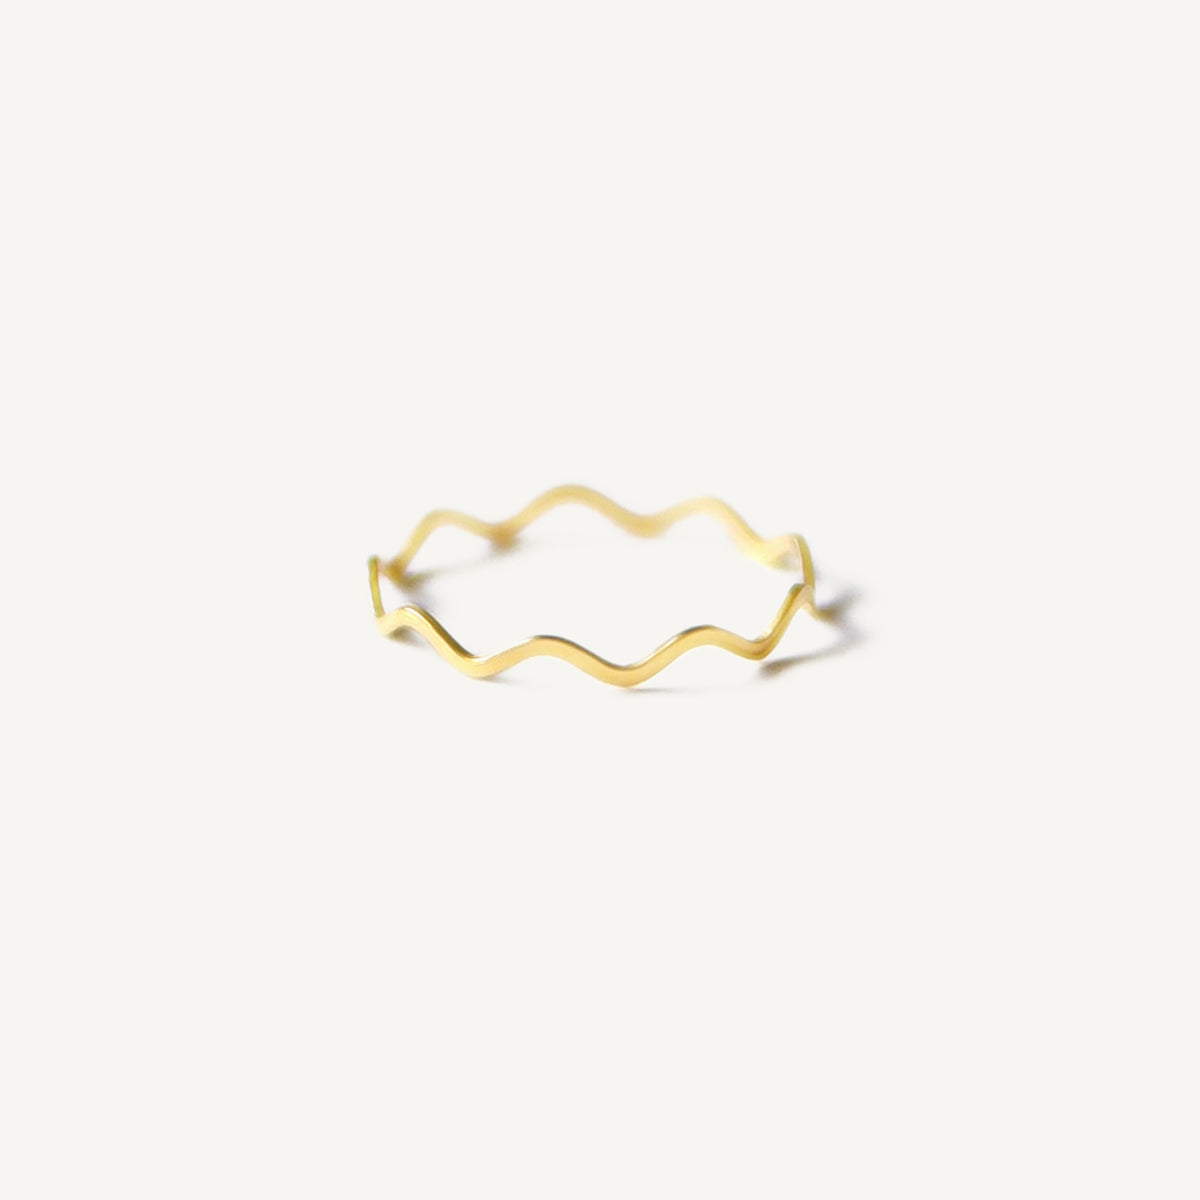 The Petite Flowy Ring